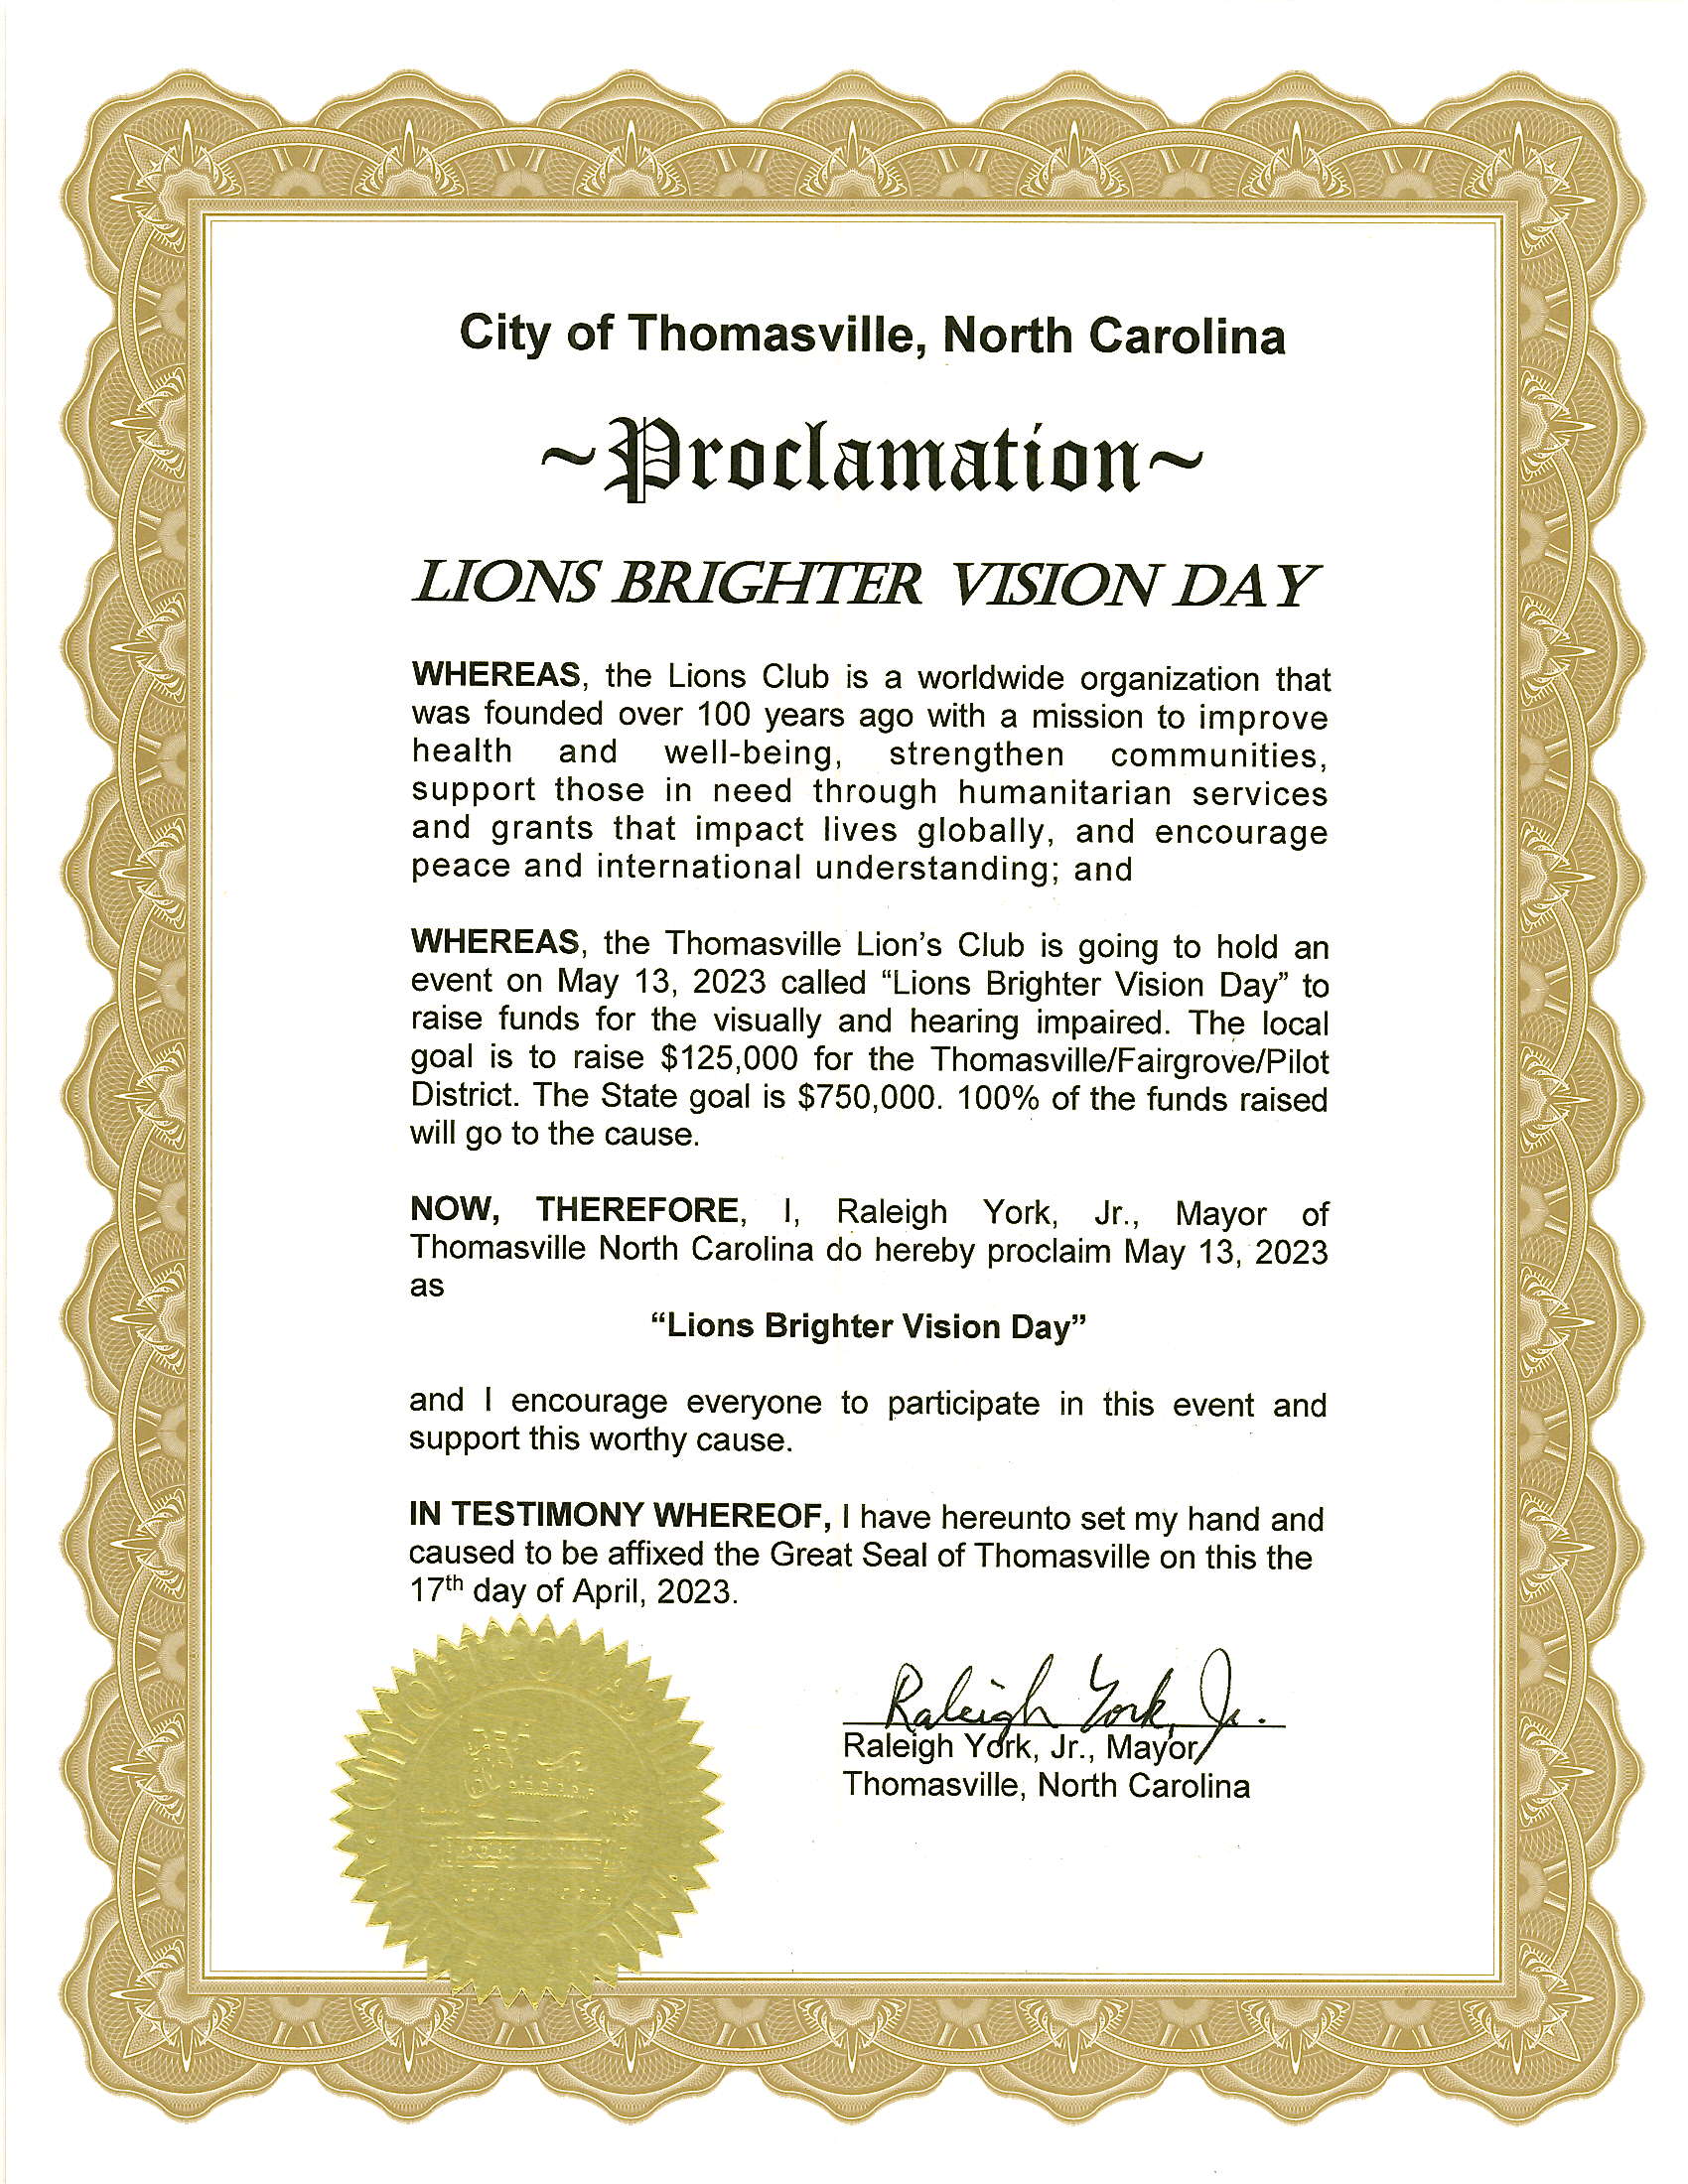 Proclamation - Lions Brighter Vision Day - May 13, 2023